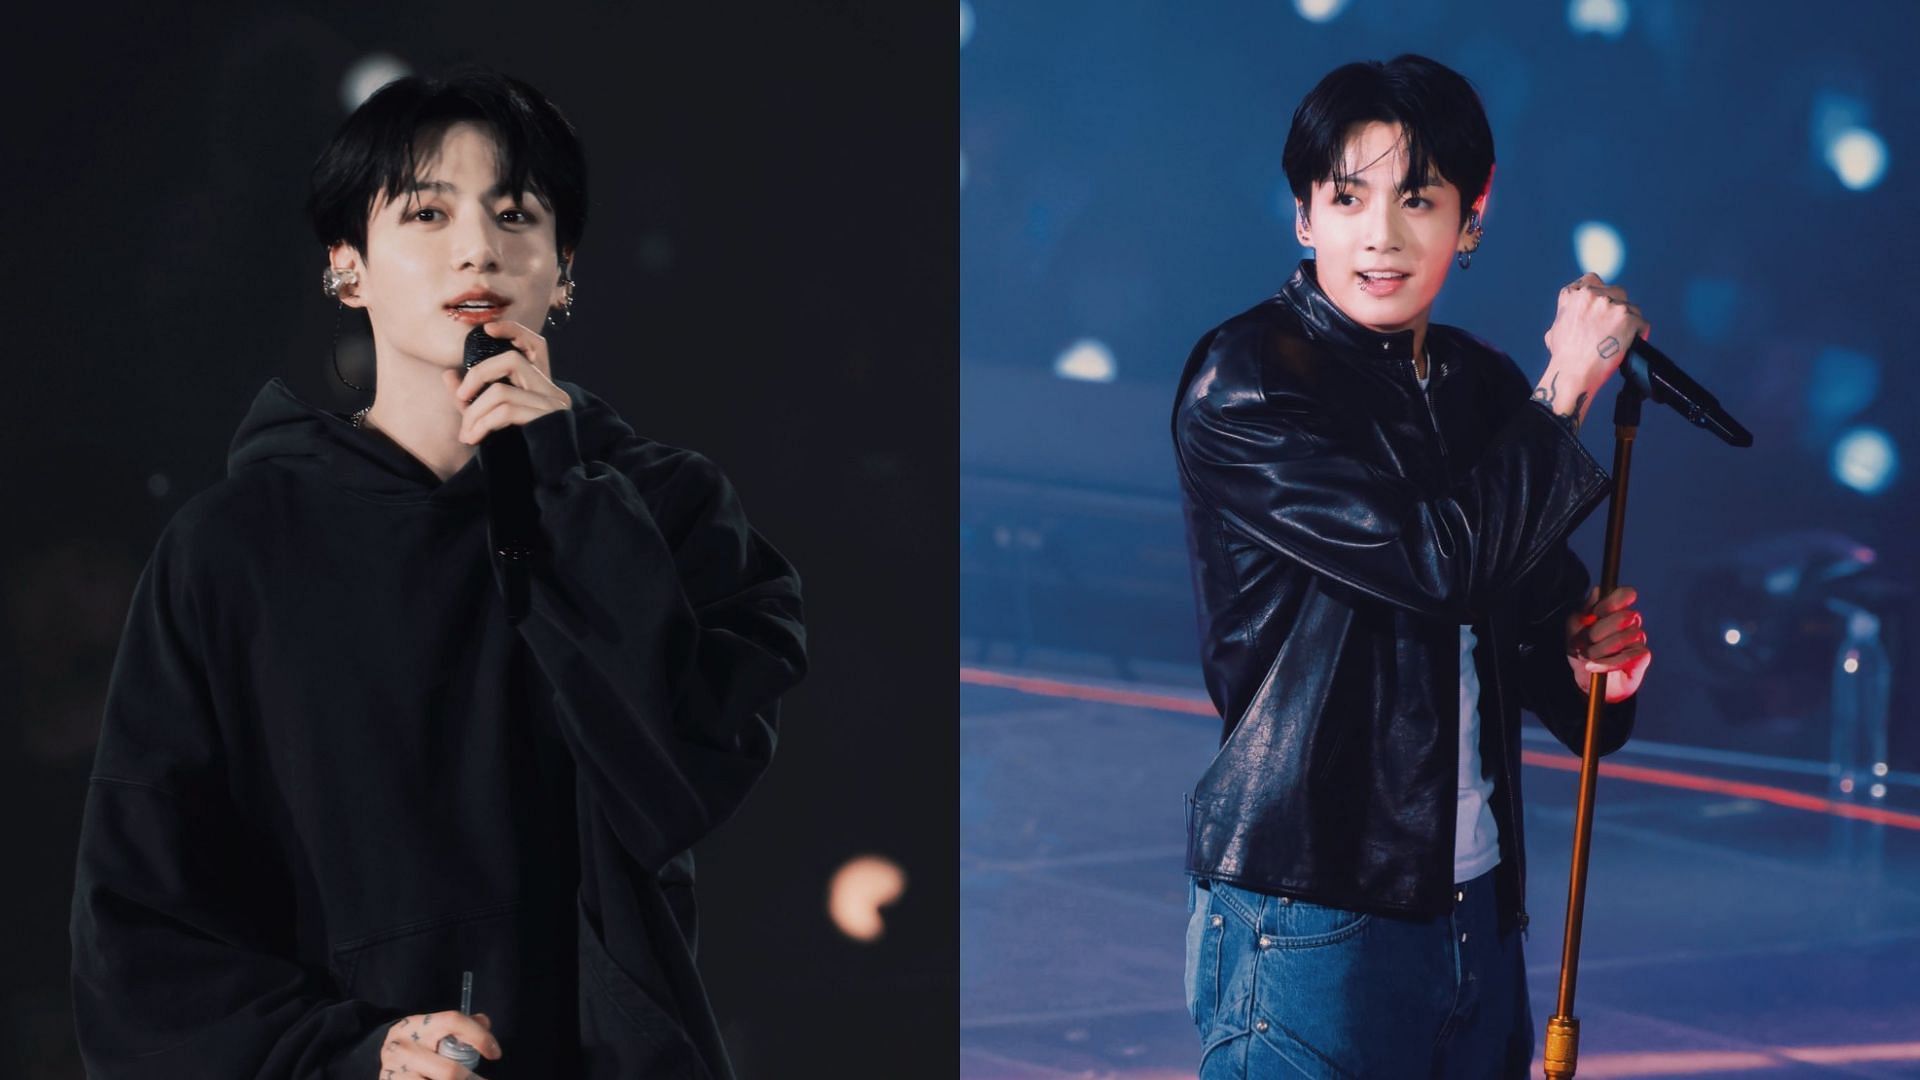 Jungkook causes financial spike for HYBE(Images via Twitter/ blacknwhite_km)